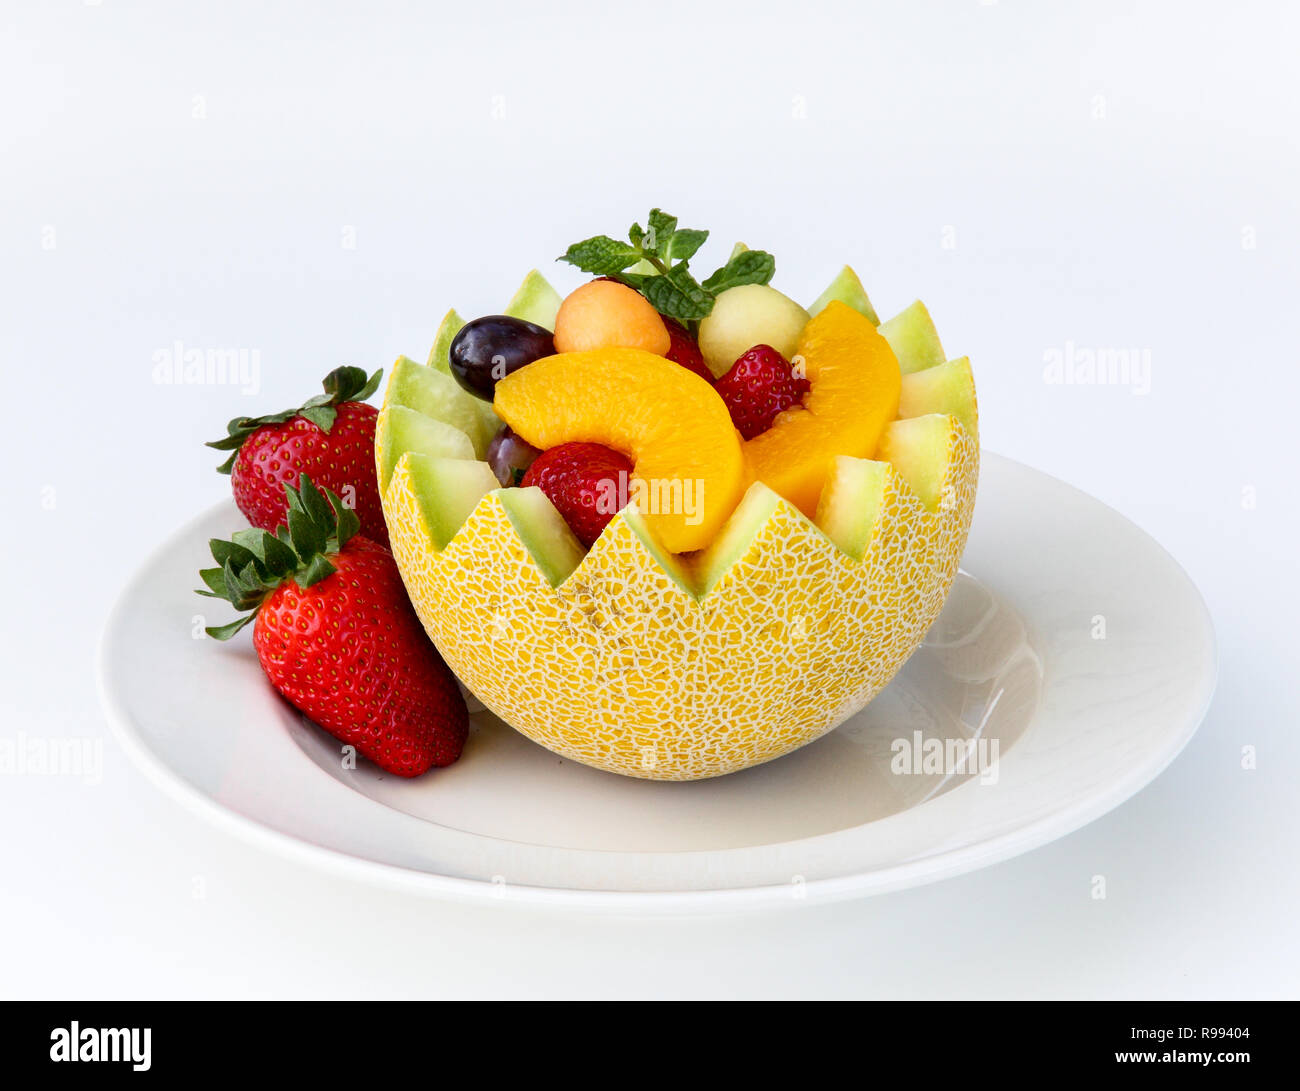 Fancy cut melon with assorted fruit inside isolated on a white background Stock Photo